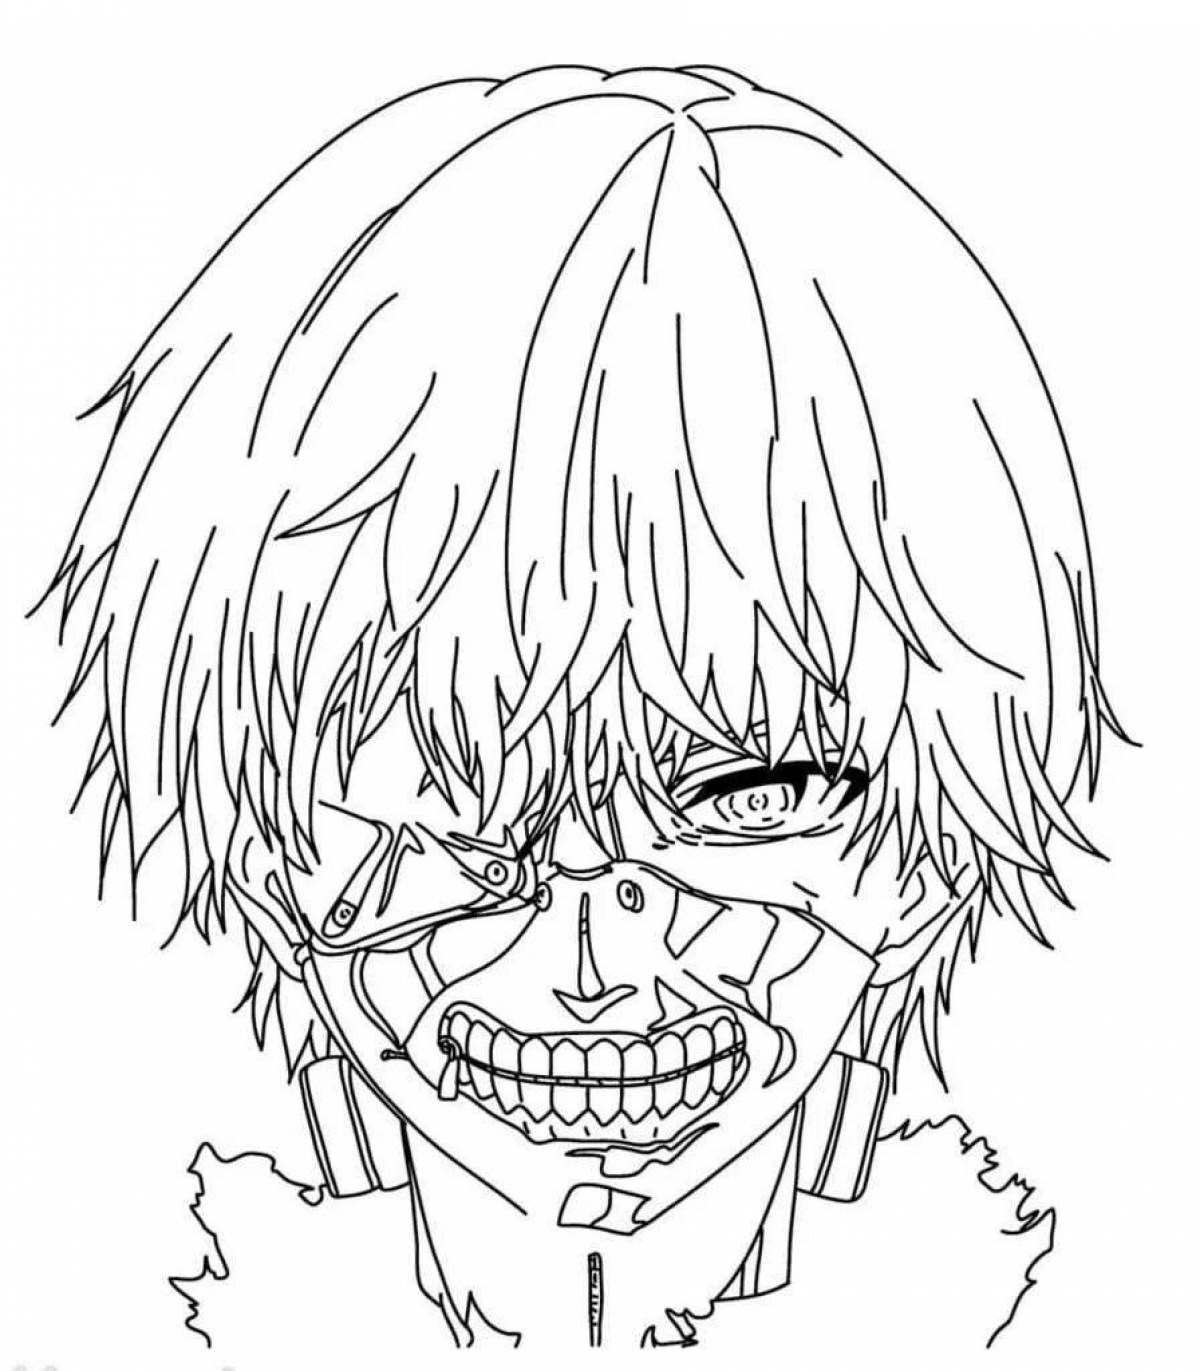 Tokyo ghoul's mesmerizing coloring page